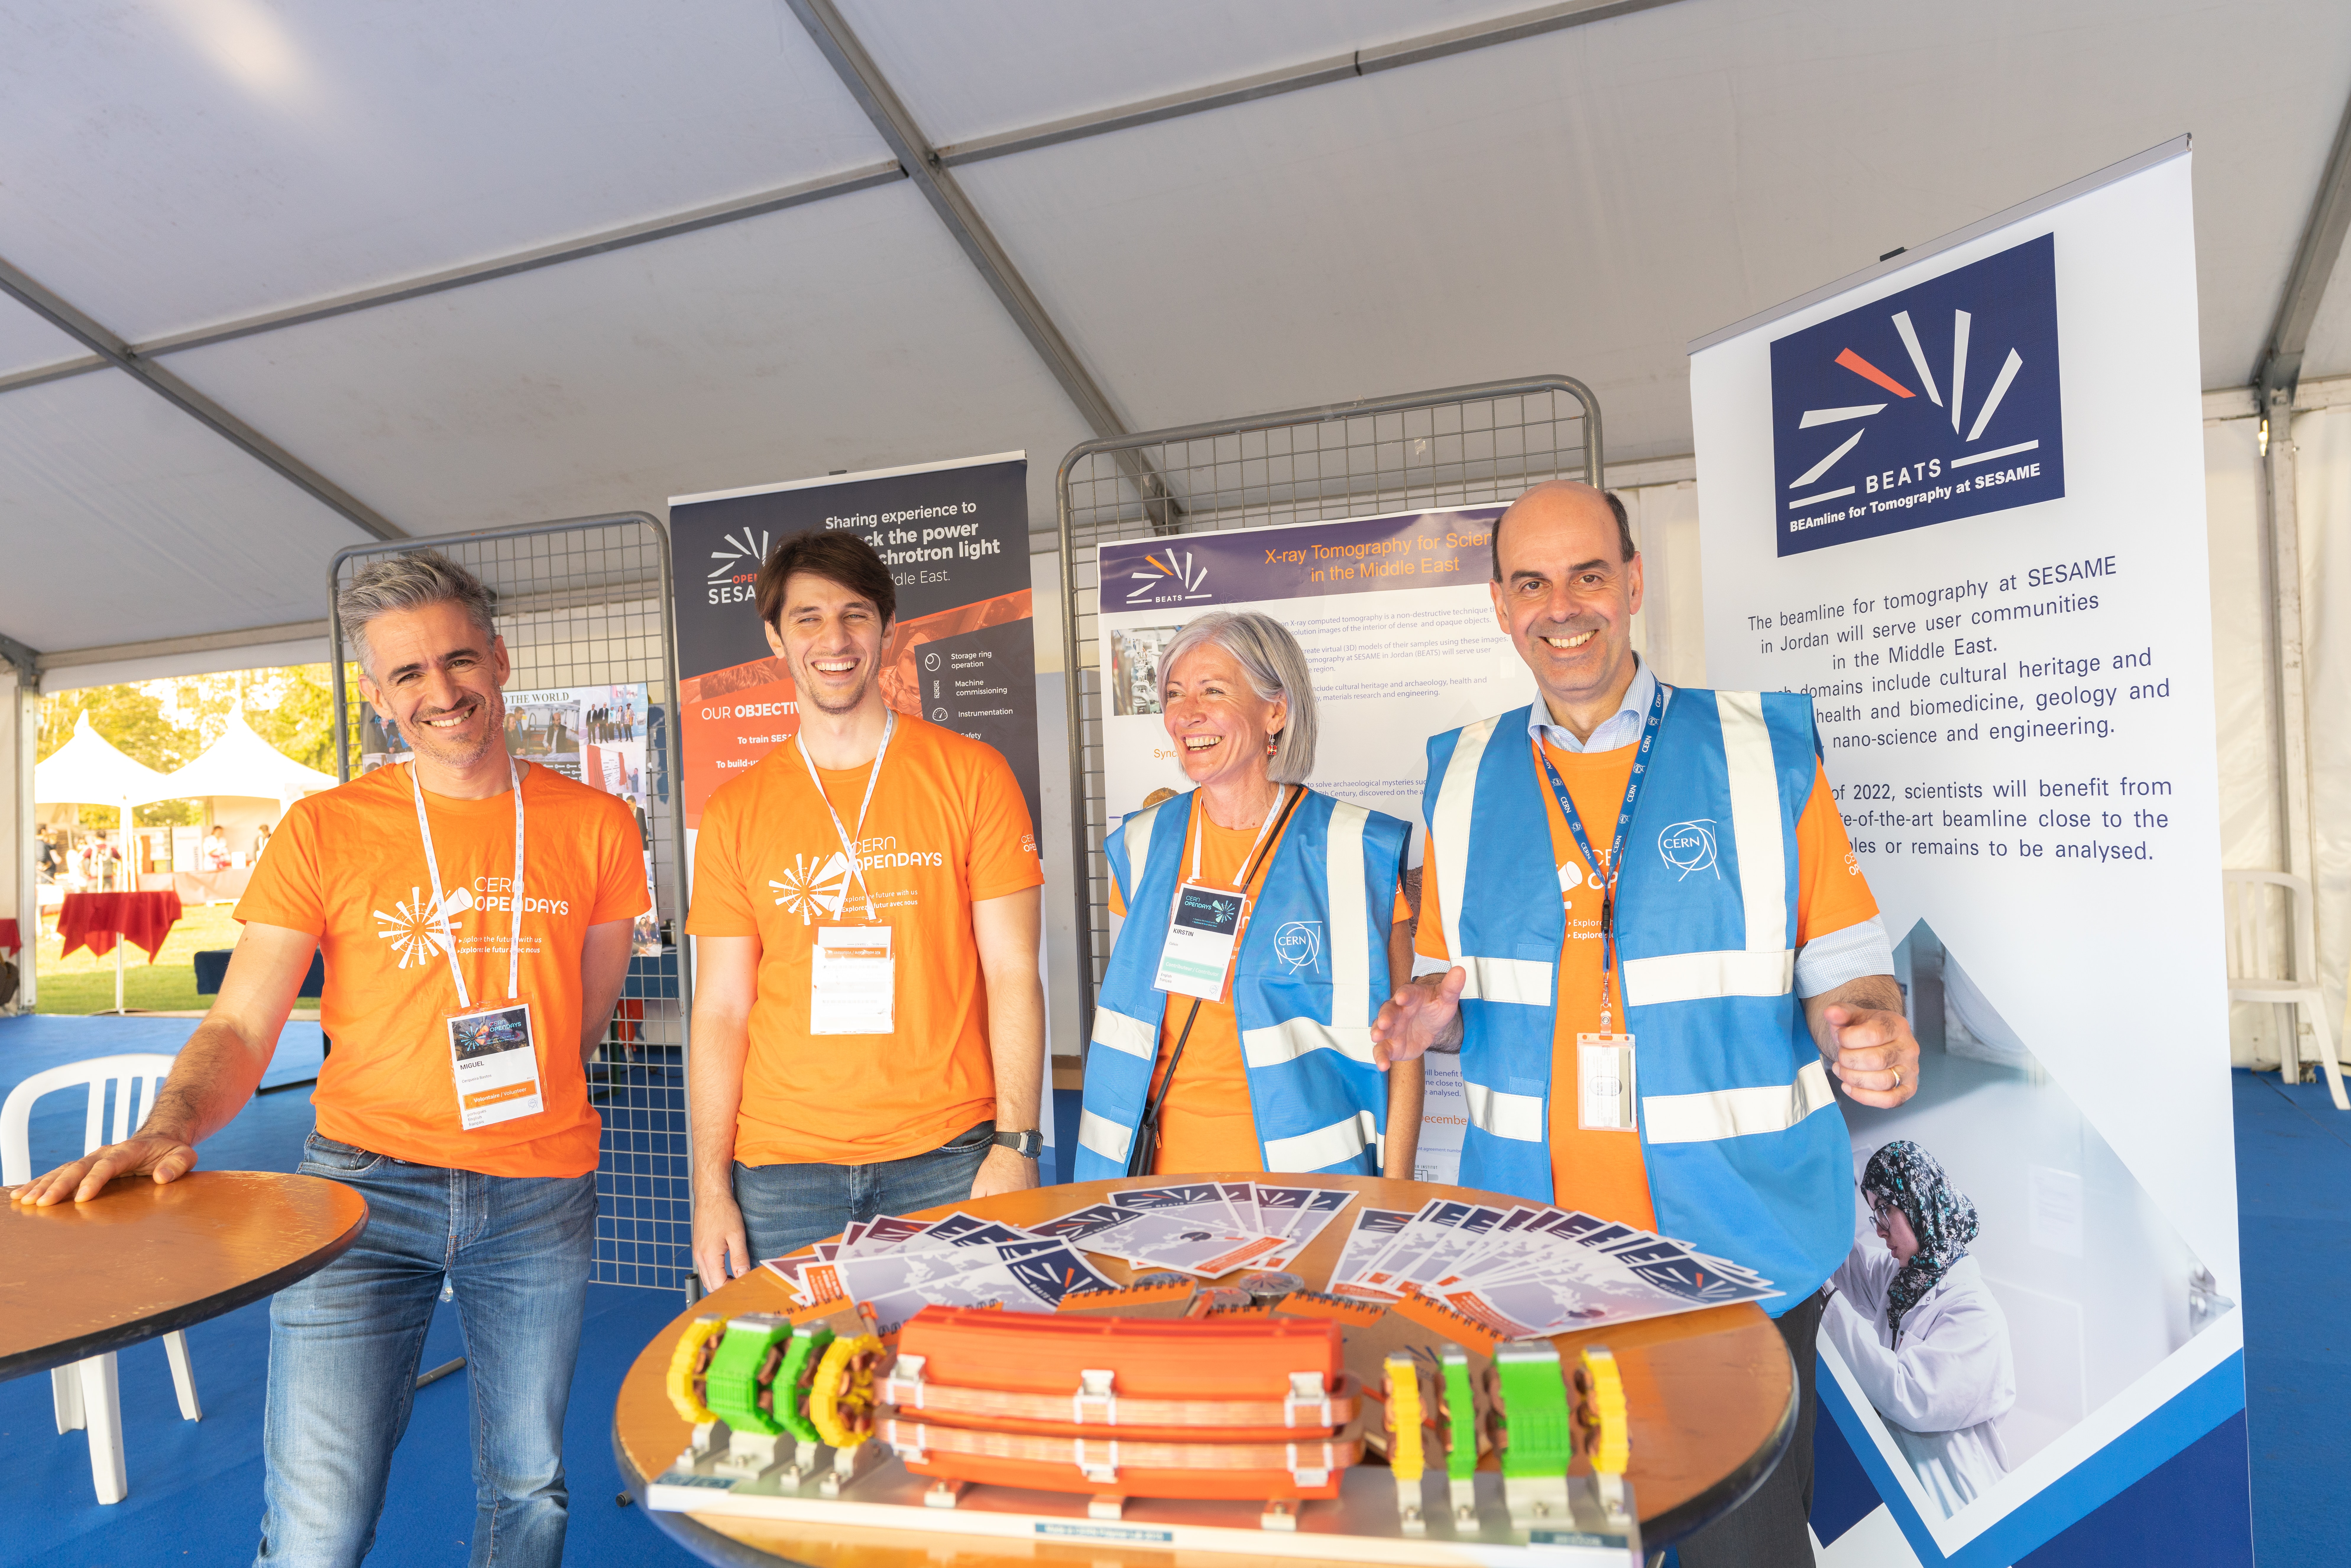 Copyright @ CERN: Some of the volunteers who presented SESAME, OPEN SESAME and BEATS to the public at the CERN Open Days. From left to right: Miguel Cerqueira Bastos (CERN), Sofian Jafar (SESAME), Kirstin Colvin (ESRF), and Emmanuel Tsesmelis (CERN)